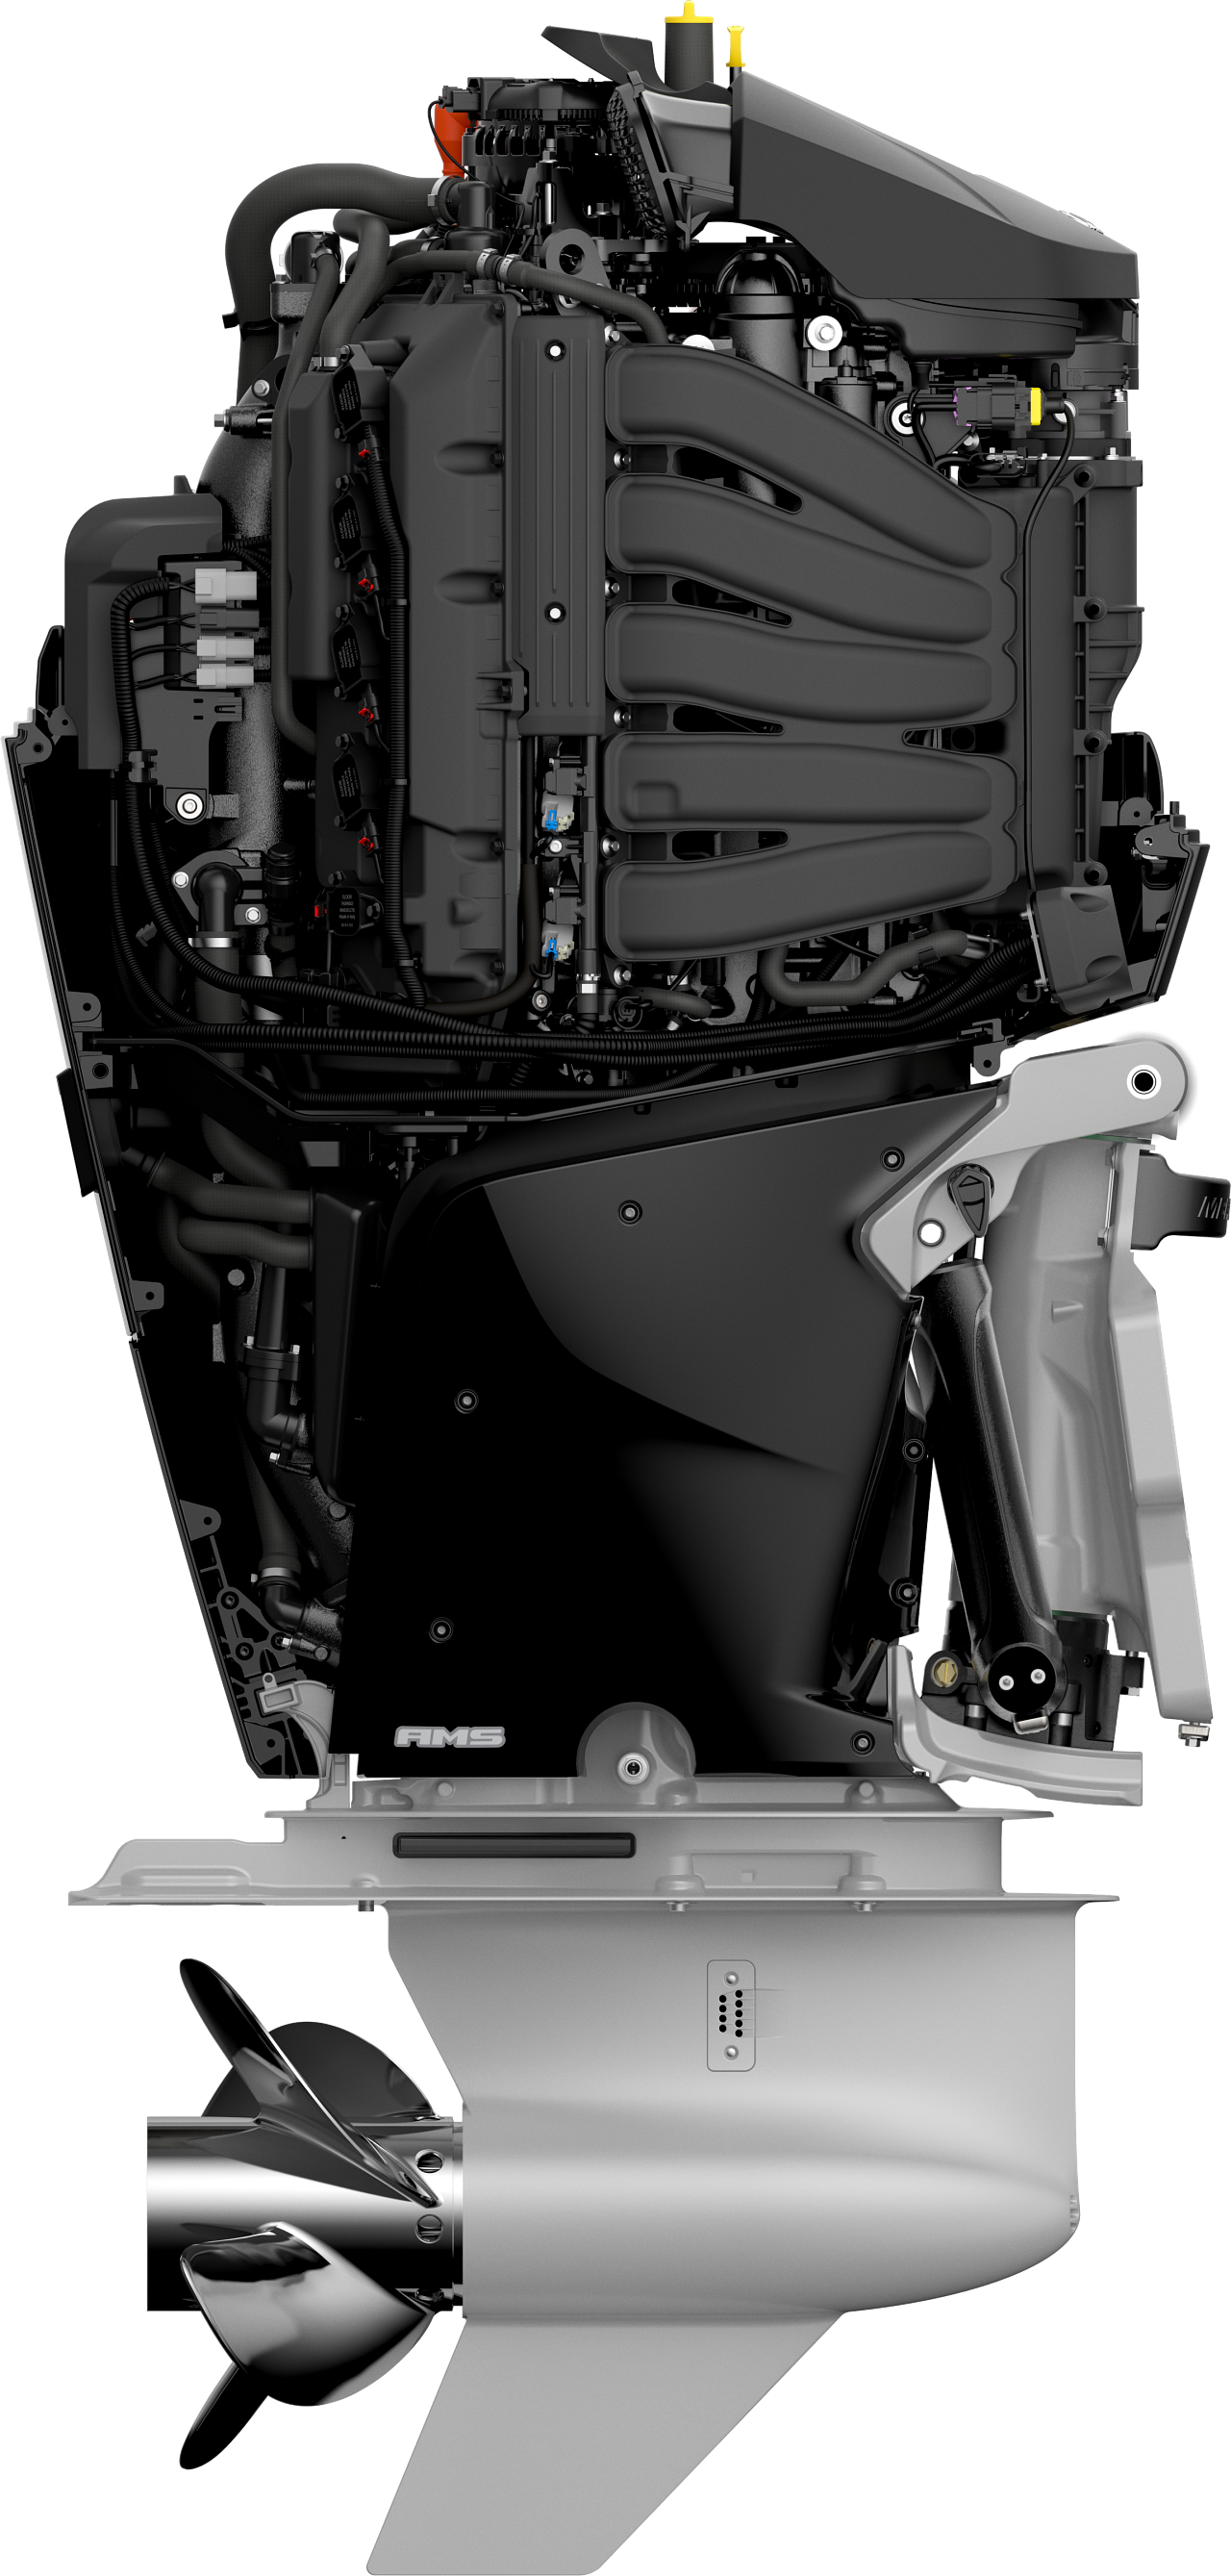 Industry-First V10 Outboard Boat Motors Make Up to 400 HP